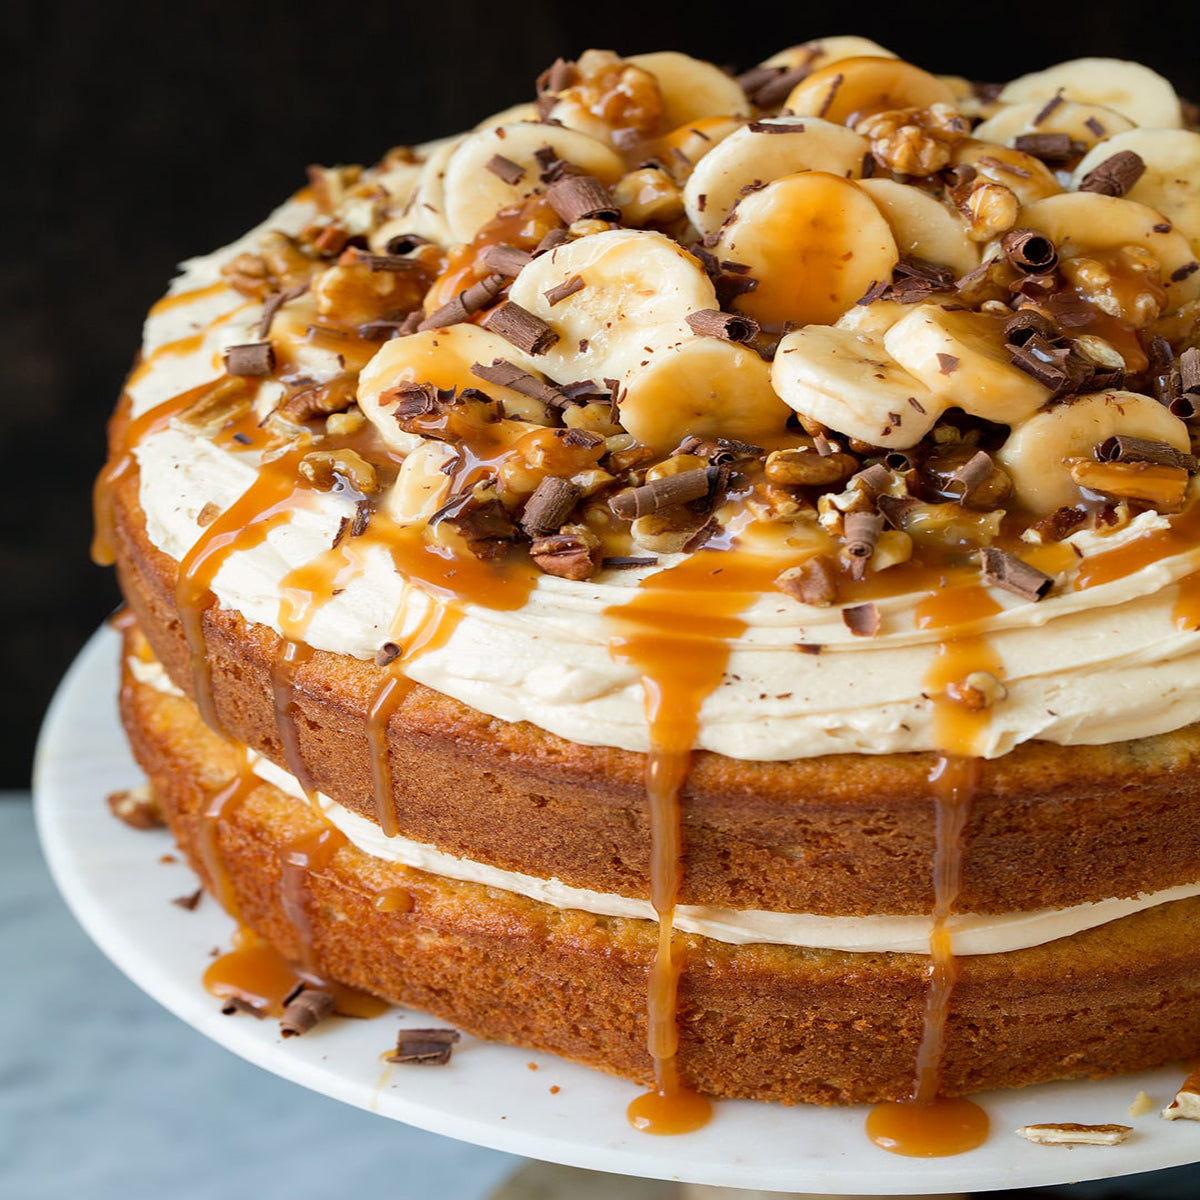 Banana Cake with Salted Caramel Frosting